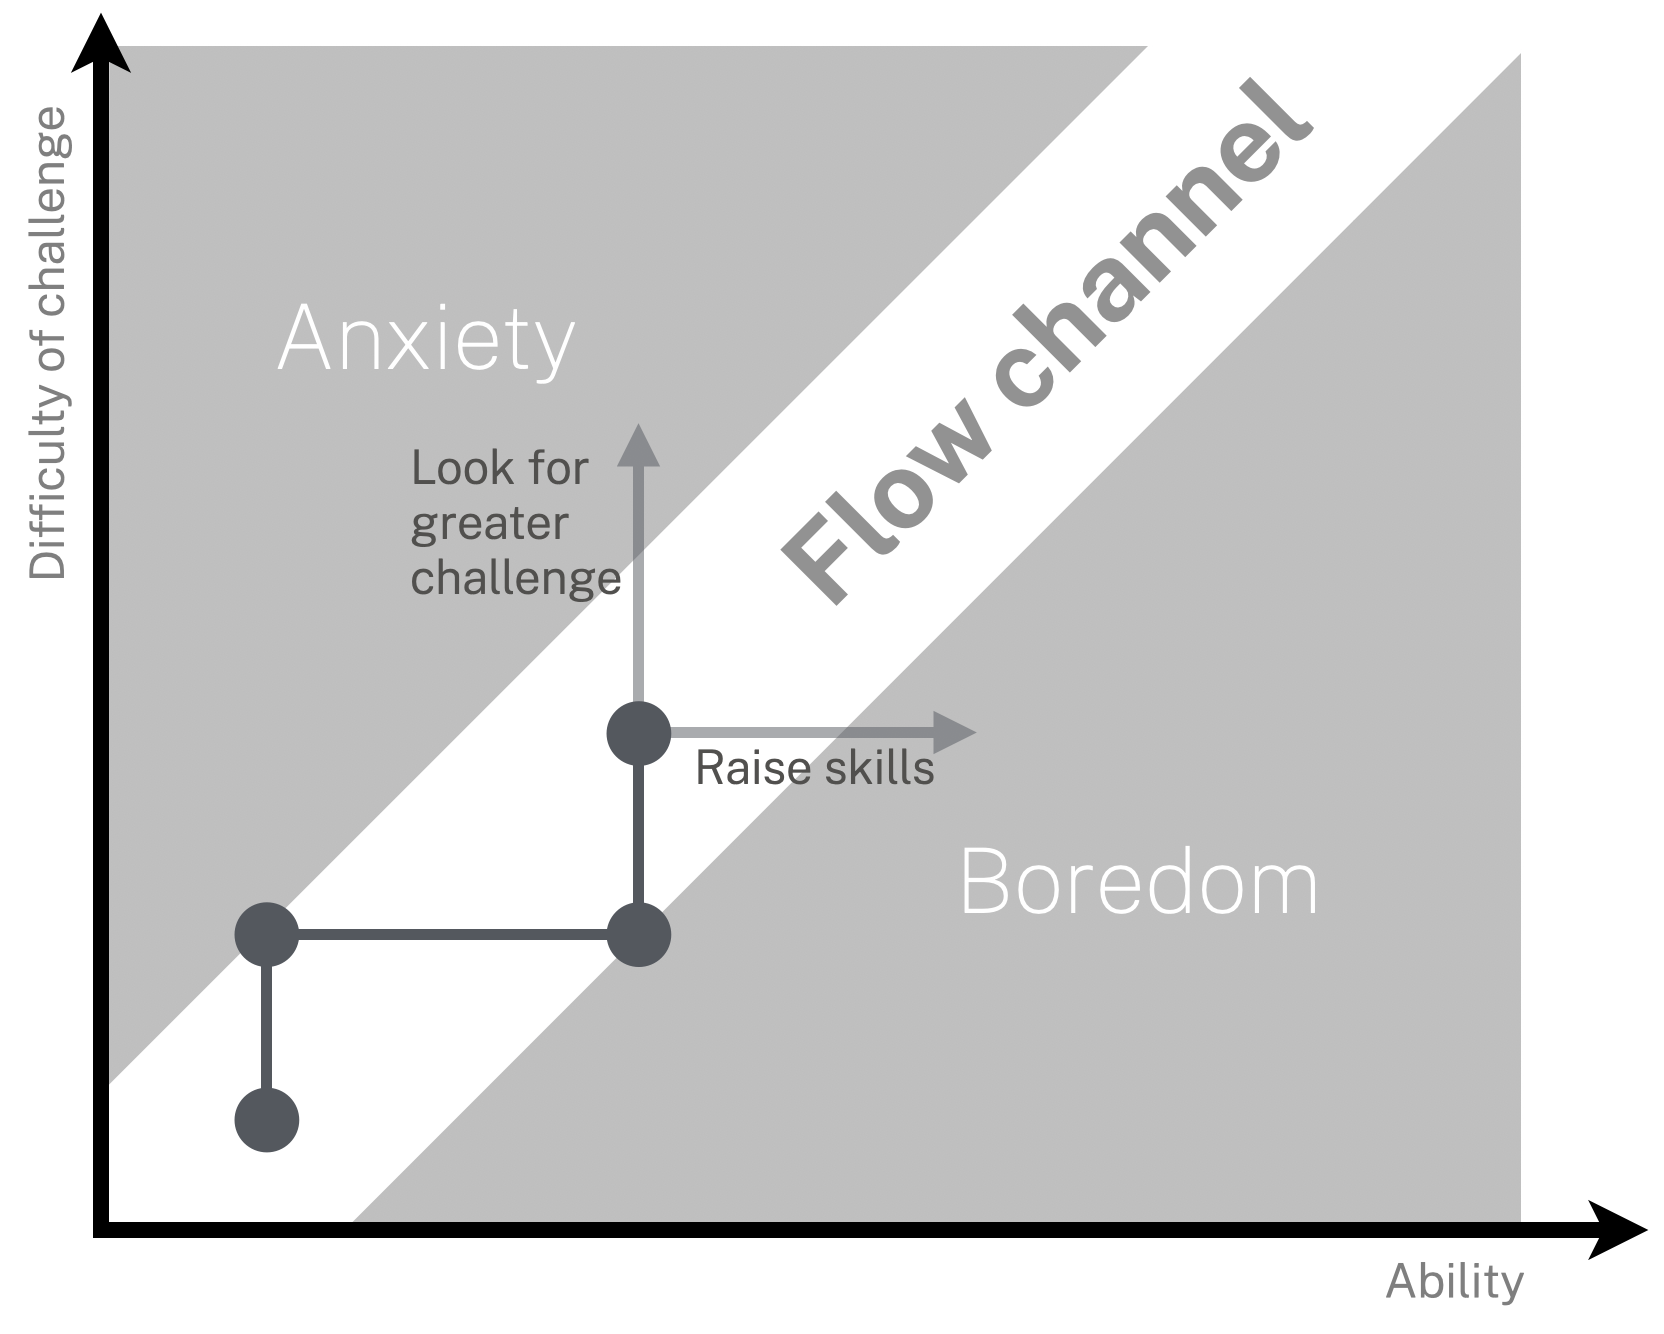 The Flow Channel as described by Csikszentmihalyi.